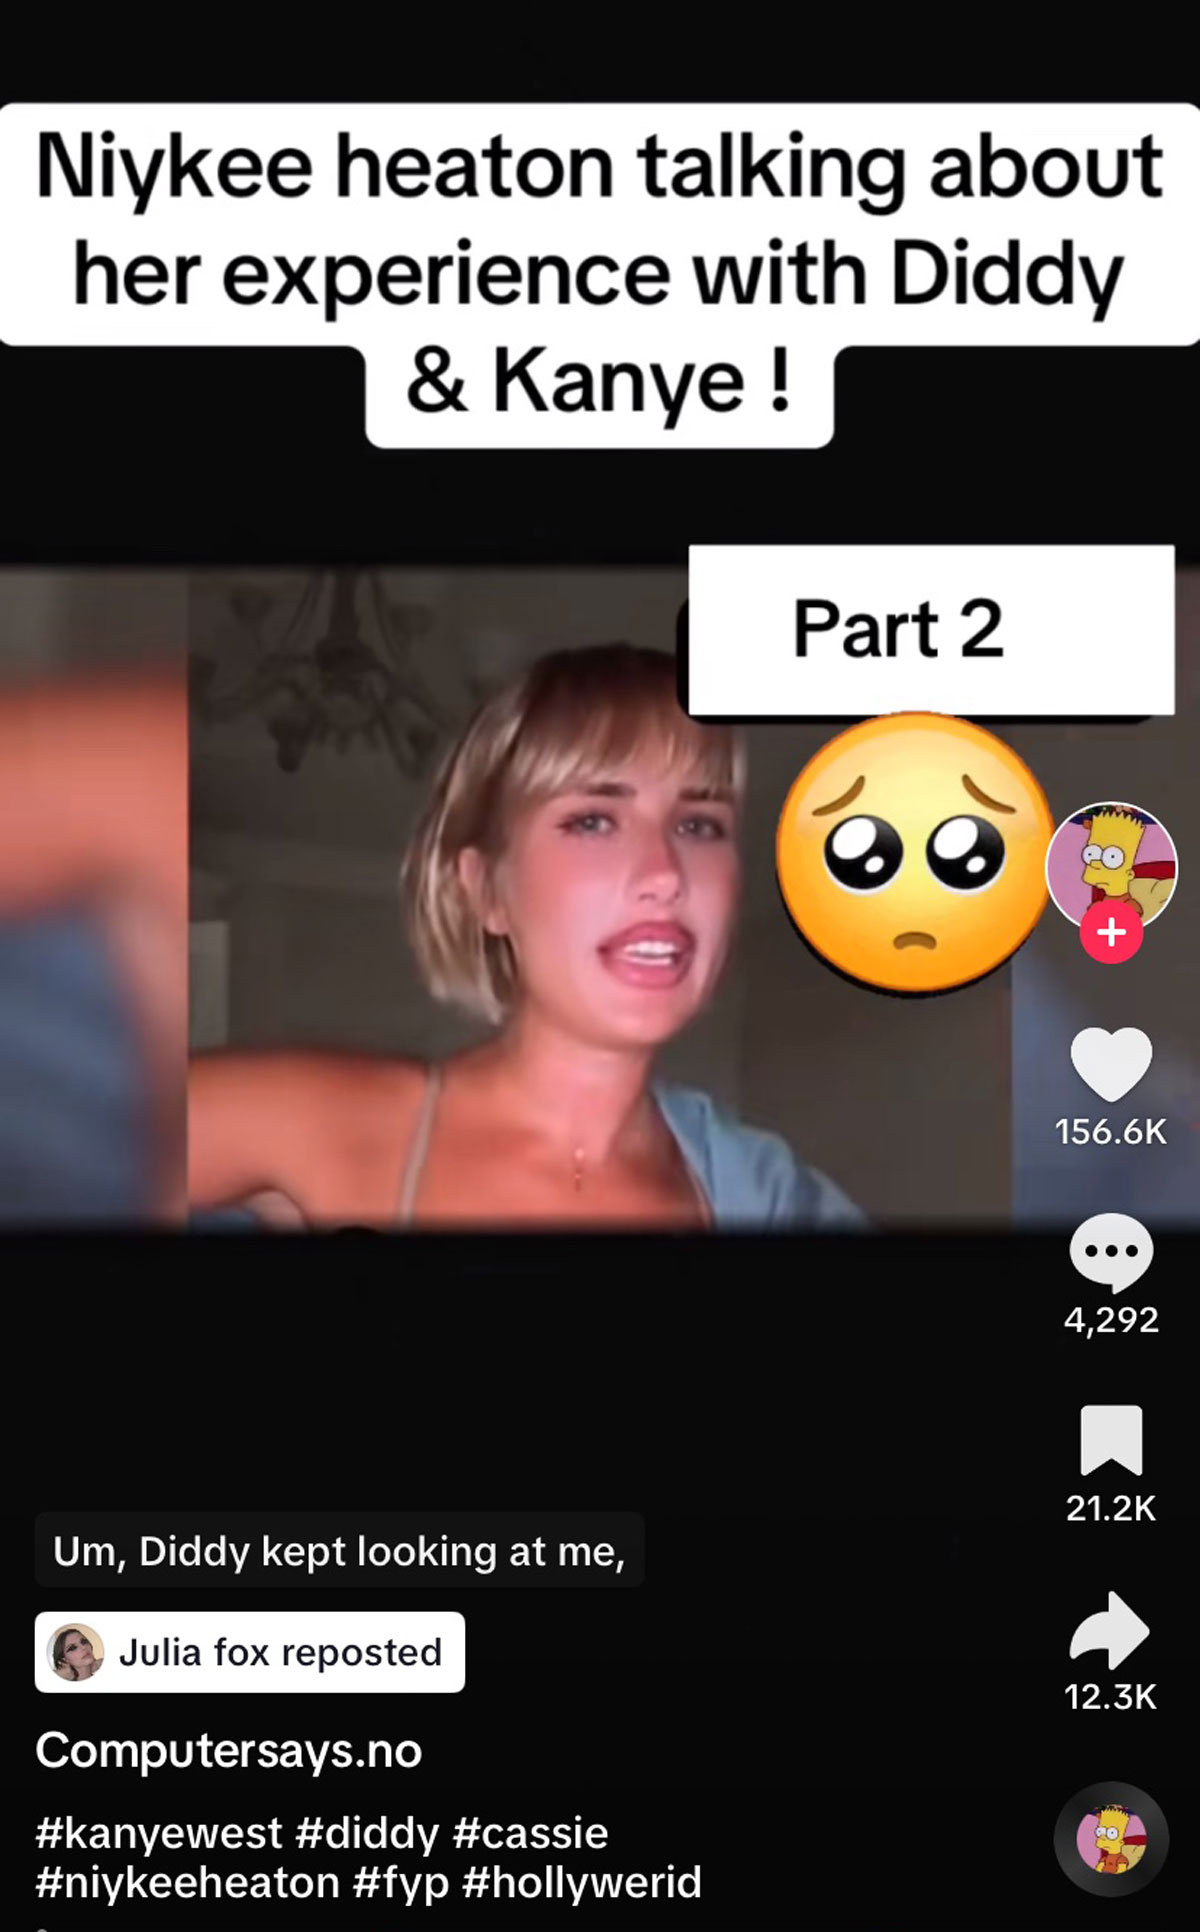 Nikyee Heaton Accuses Diddy & Kanye West Of Attempted SA In Terrifying Studio Story -- And Julia Fox Reposts It! 